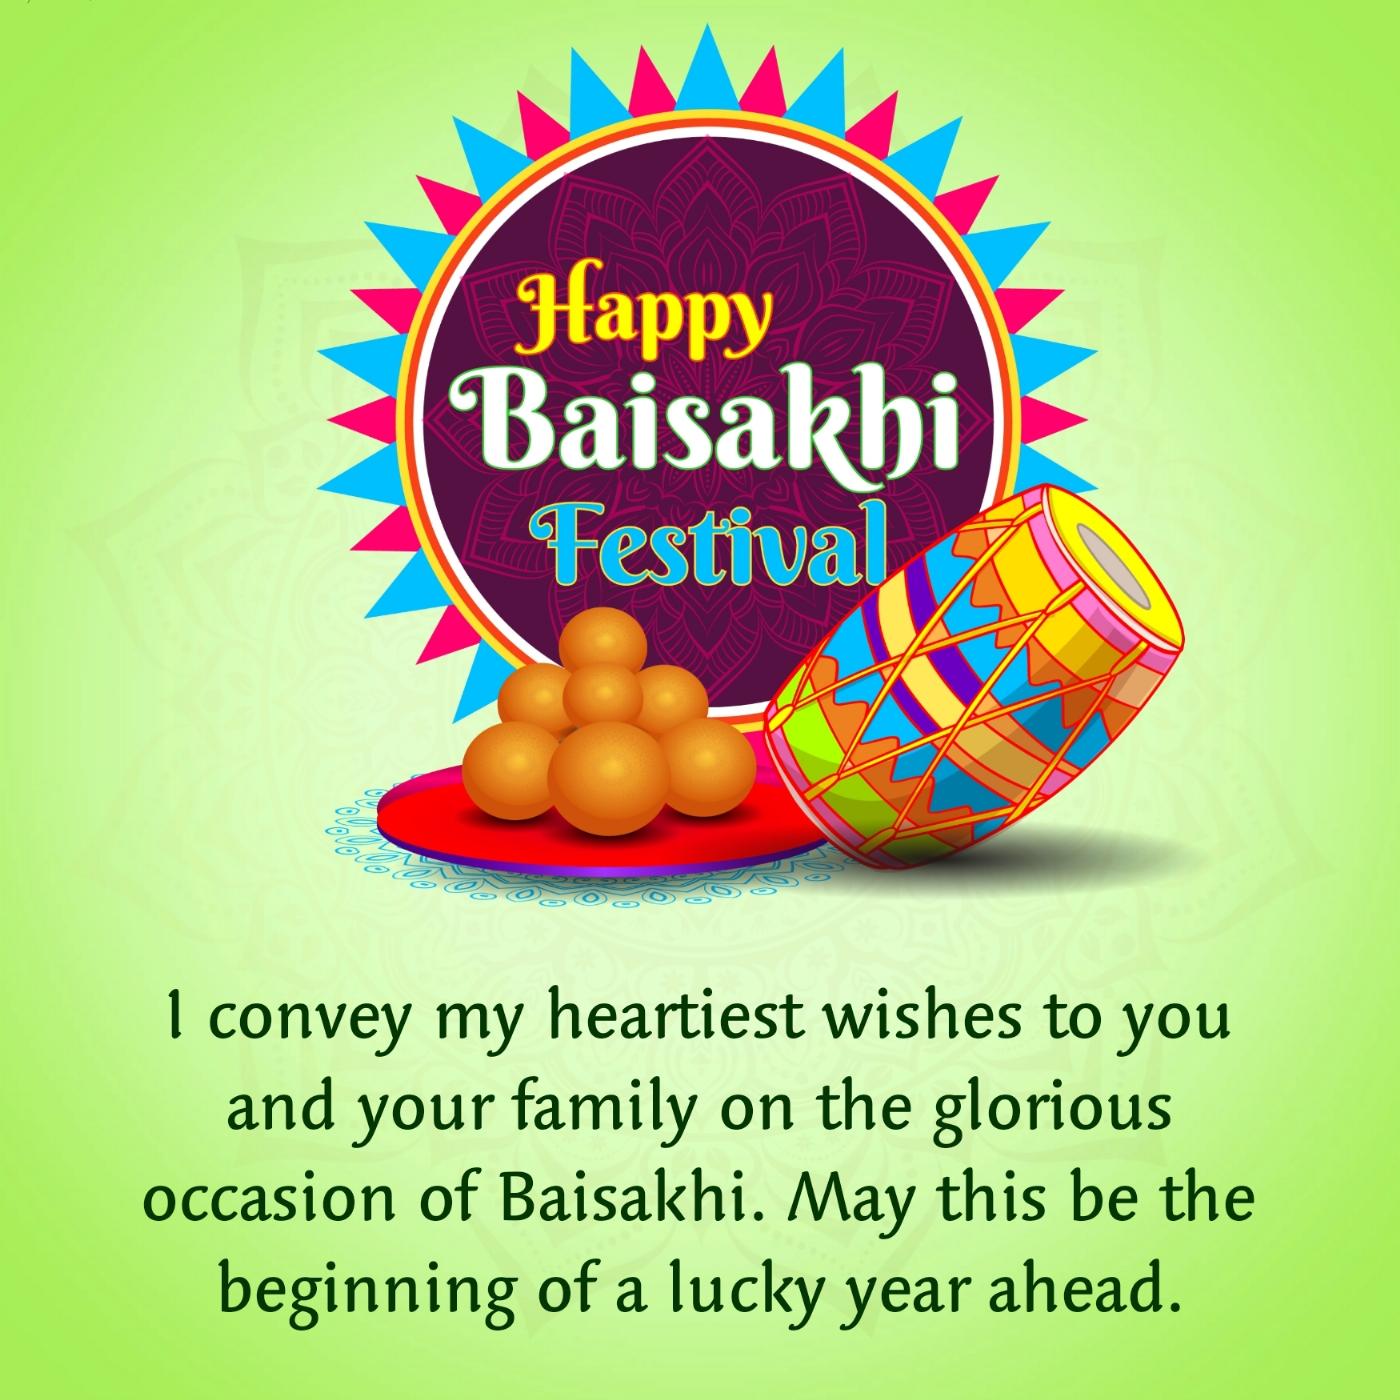 I convey my heartiest wishes to you and your family